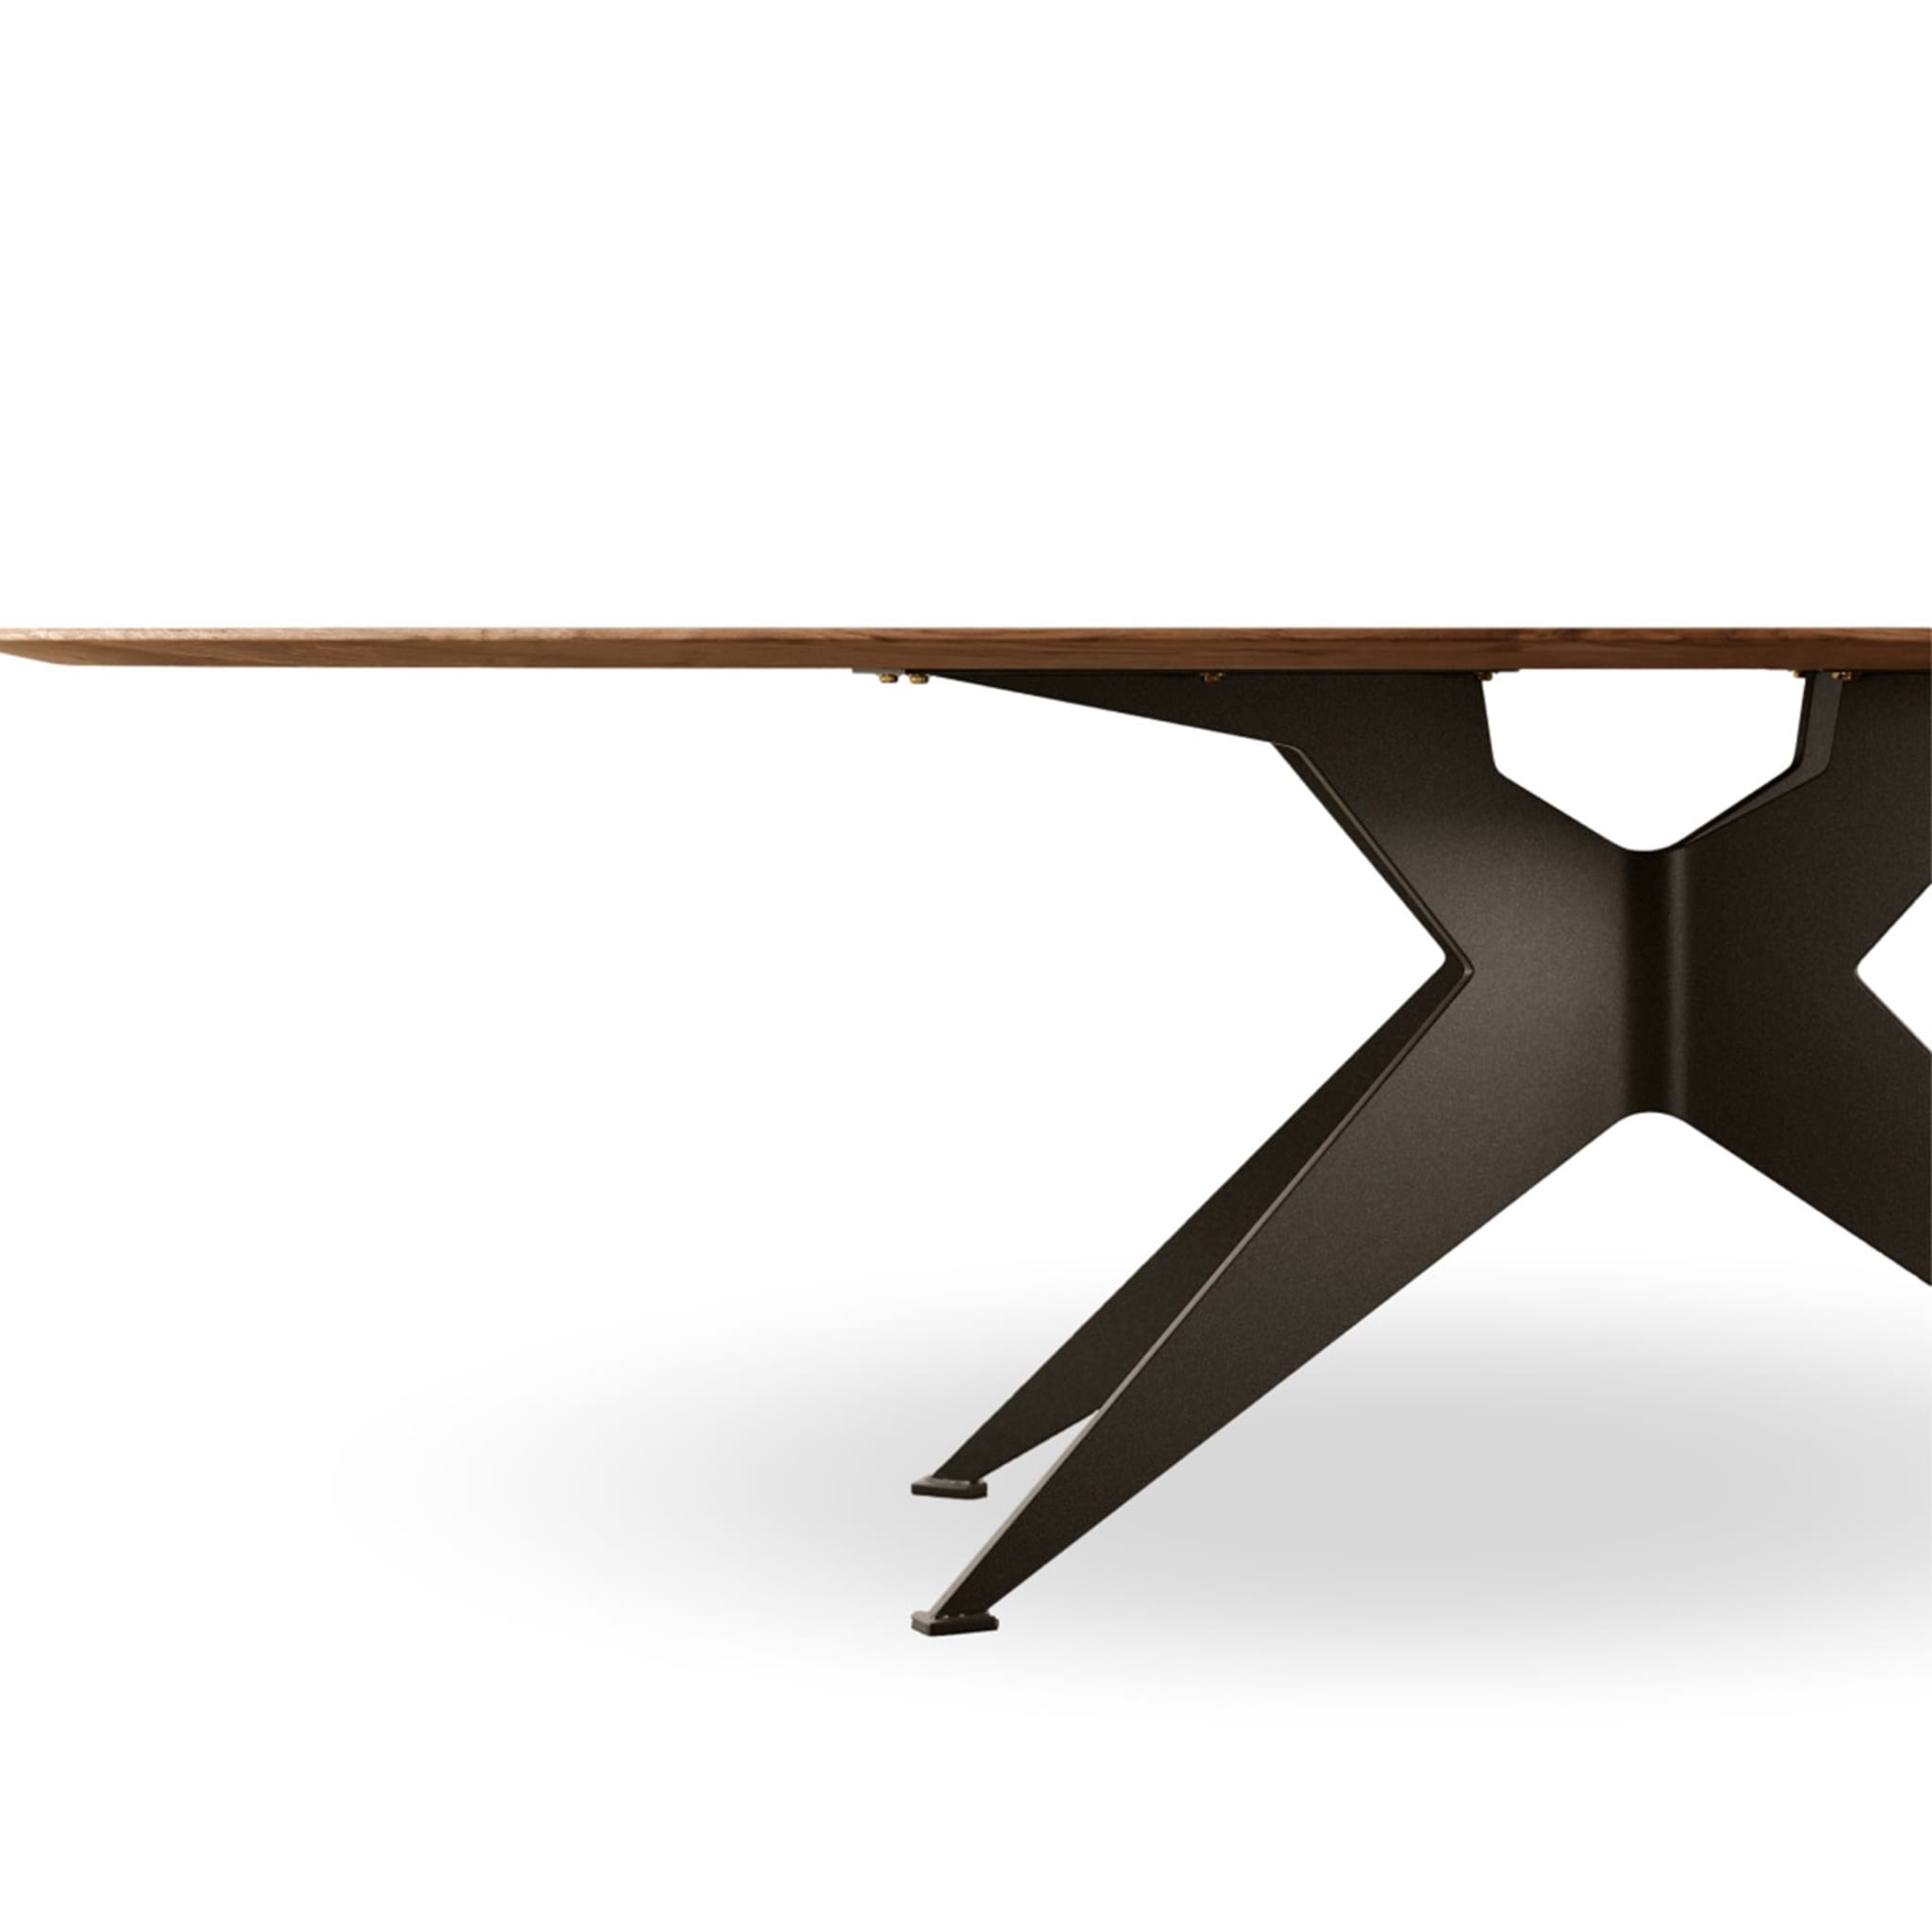 Durmast Oval Dining Table - Alternative view 2